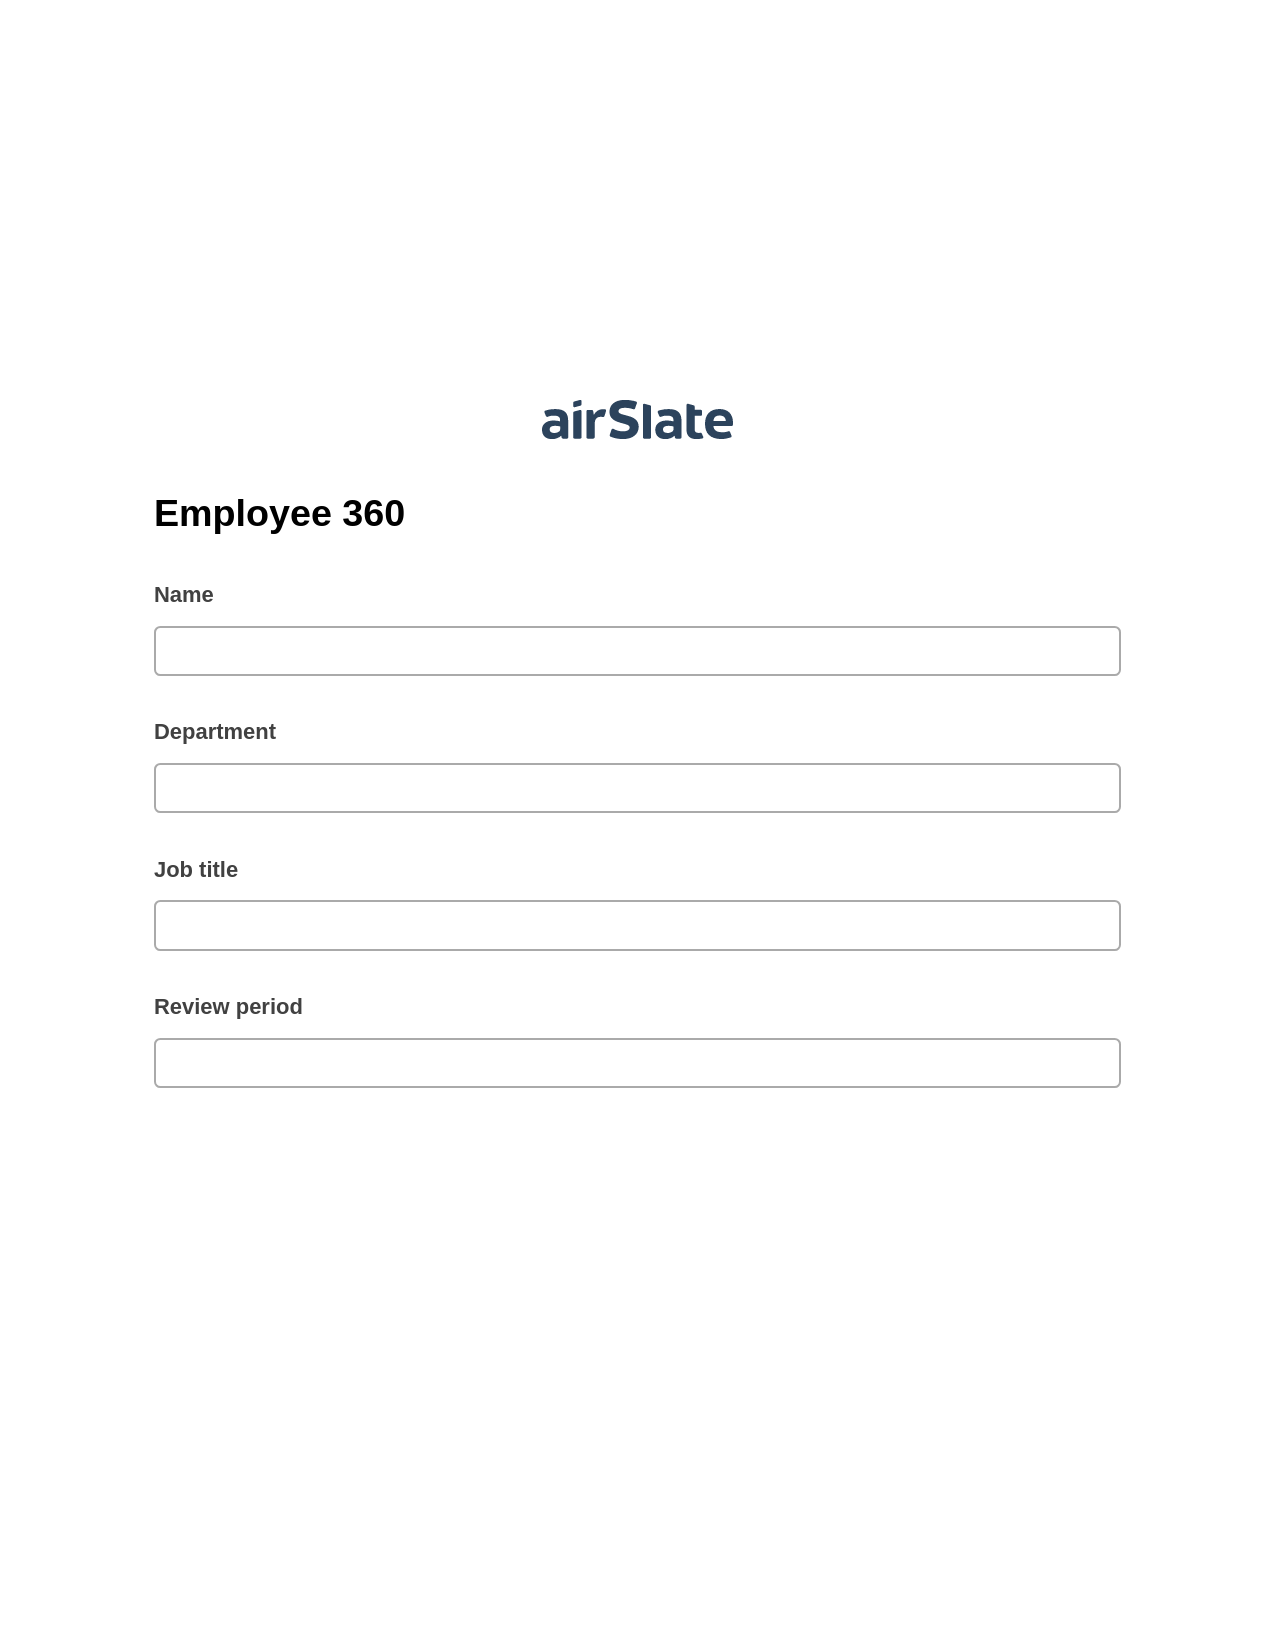 Employee 360 Pre-fill from CSV File Bot, Assign Roles to Recipients Bot, Webhook Postfinish Bot